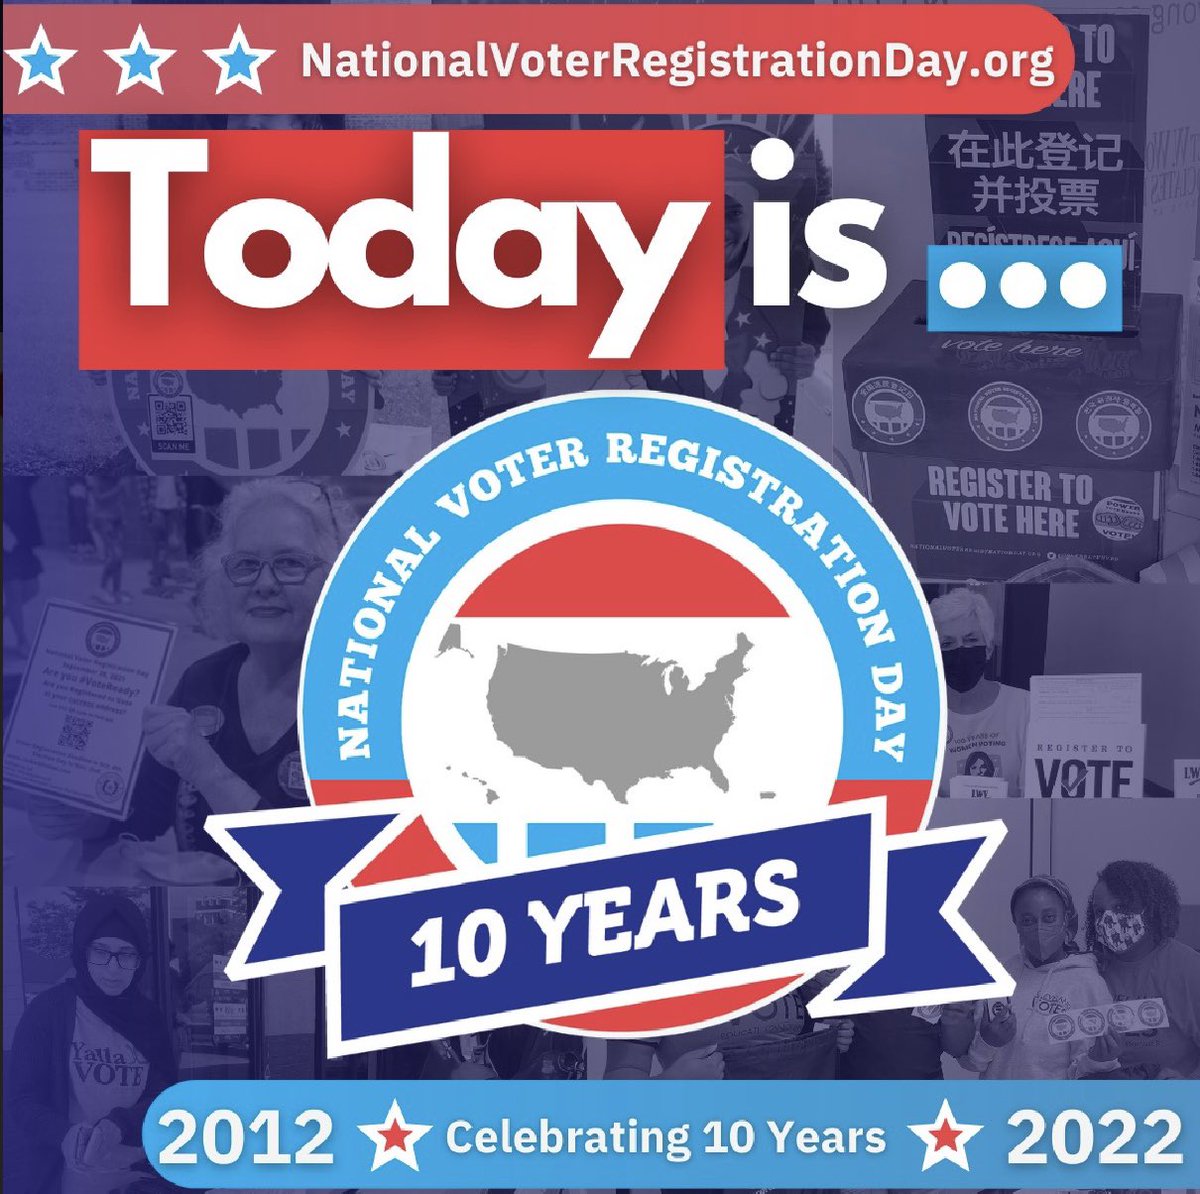 It’s #NationalVoterRegistrationDay! Our voices and our votes matter. Take 30 seconds to register to vote, check your registration status, or find a registration event on or offline near you! NationalVoterRegistrationDay.org #VoteReady @AthleteAlly